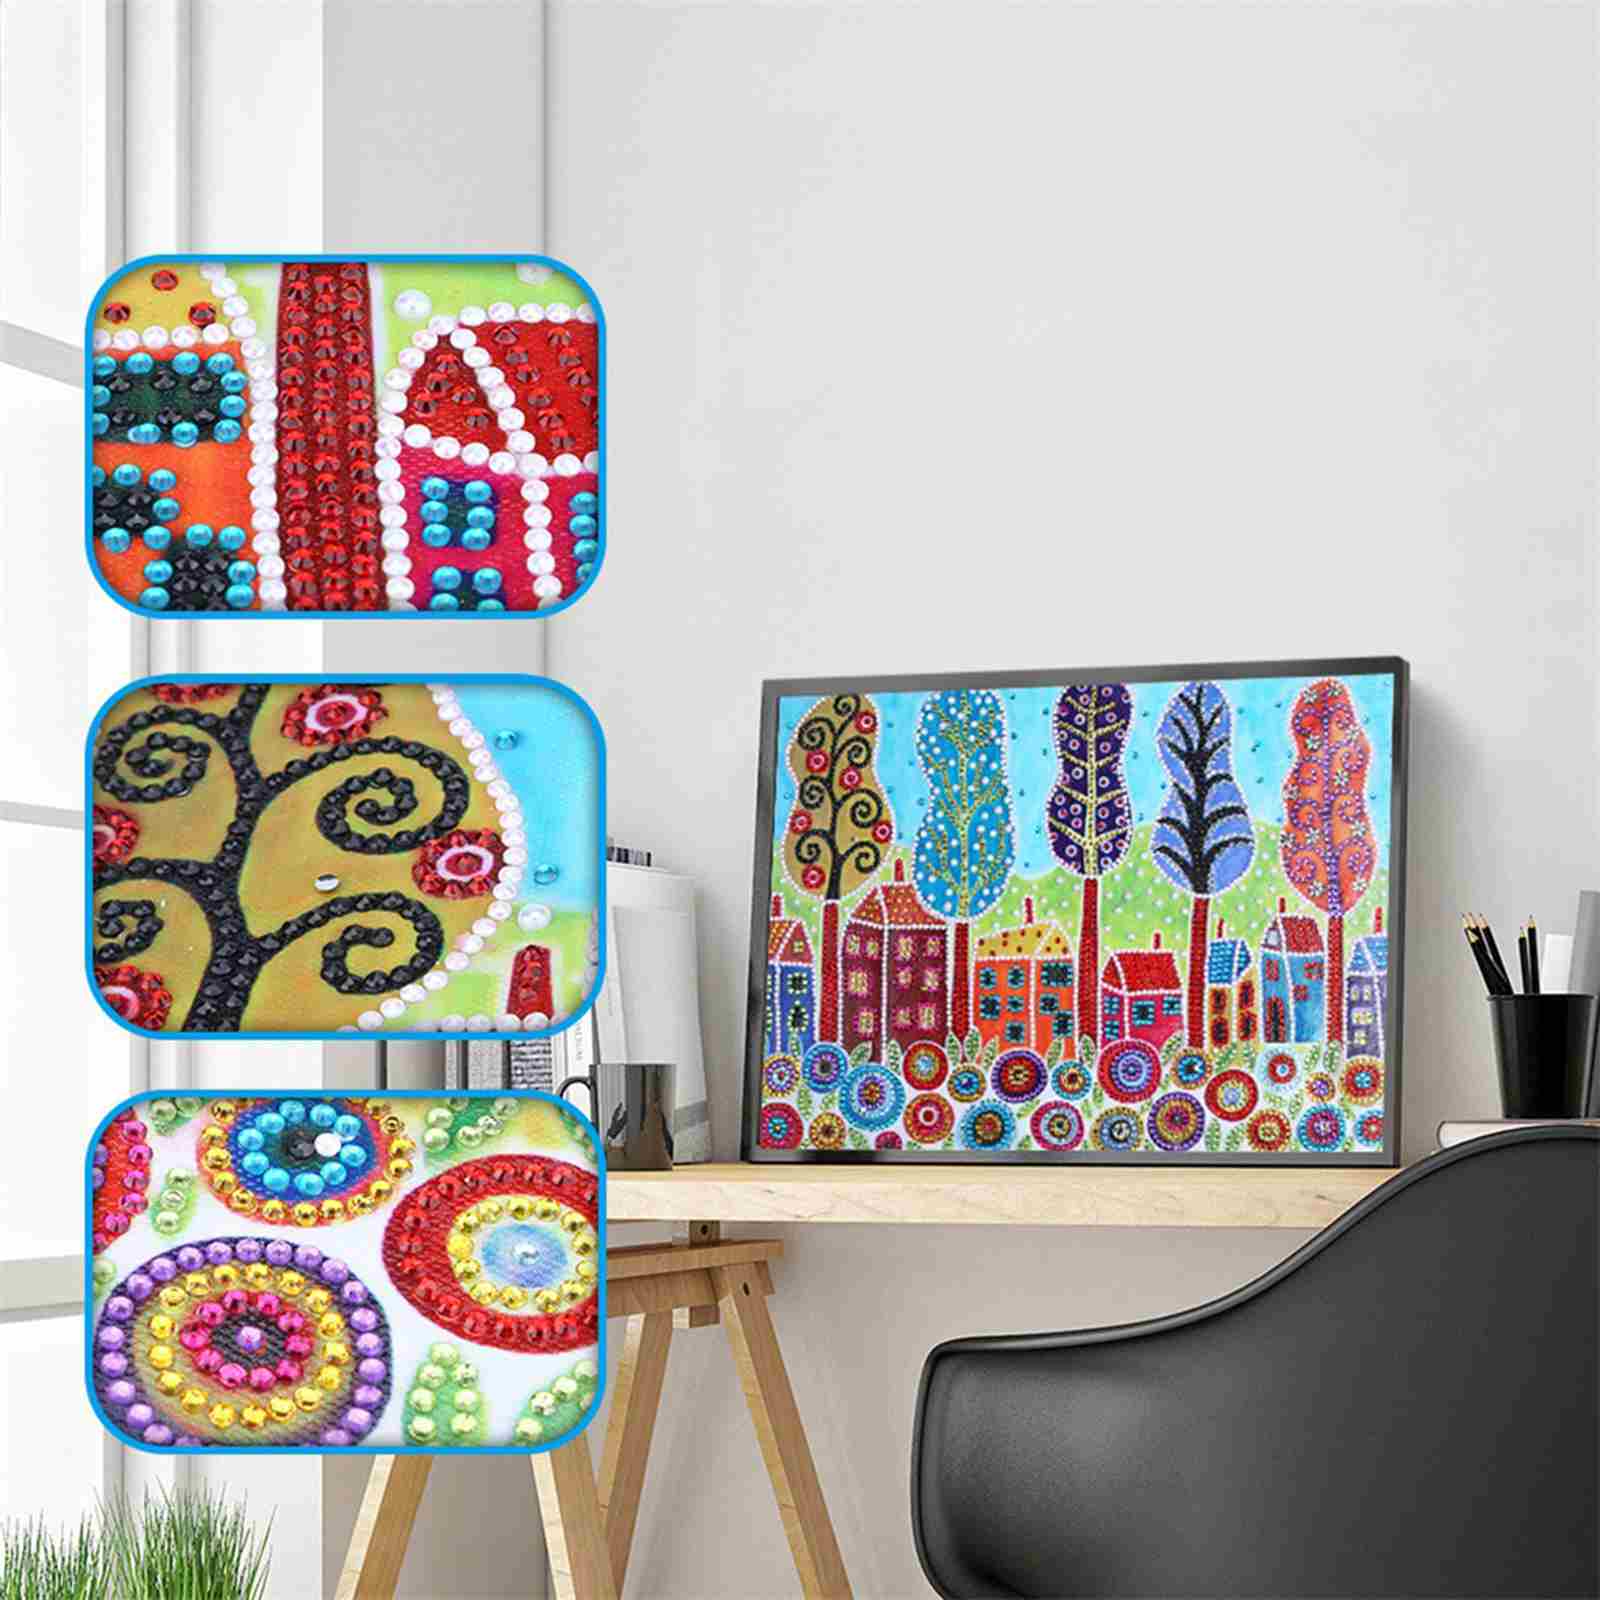 Globleland DIY Diamond Painting Canvas Kits, with Village Landscape Pattern Canvas, Resin Rhinestones, Pen, Tray Plate and Glue Clay, Mixed Color, 303x408x0.4mm, 2Set/Pack